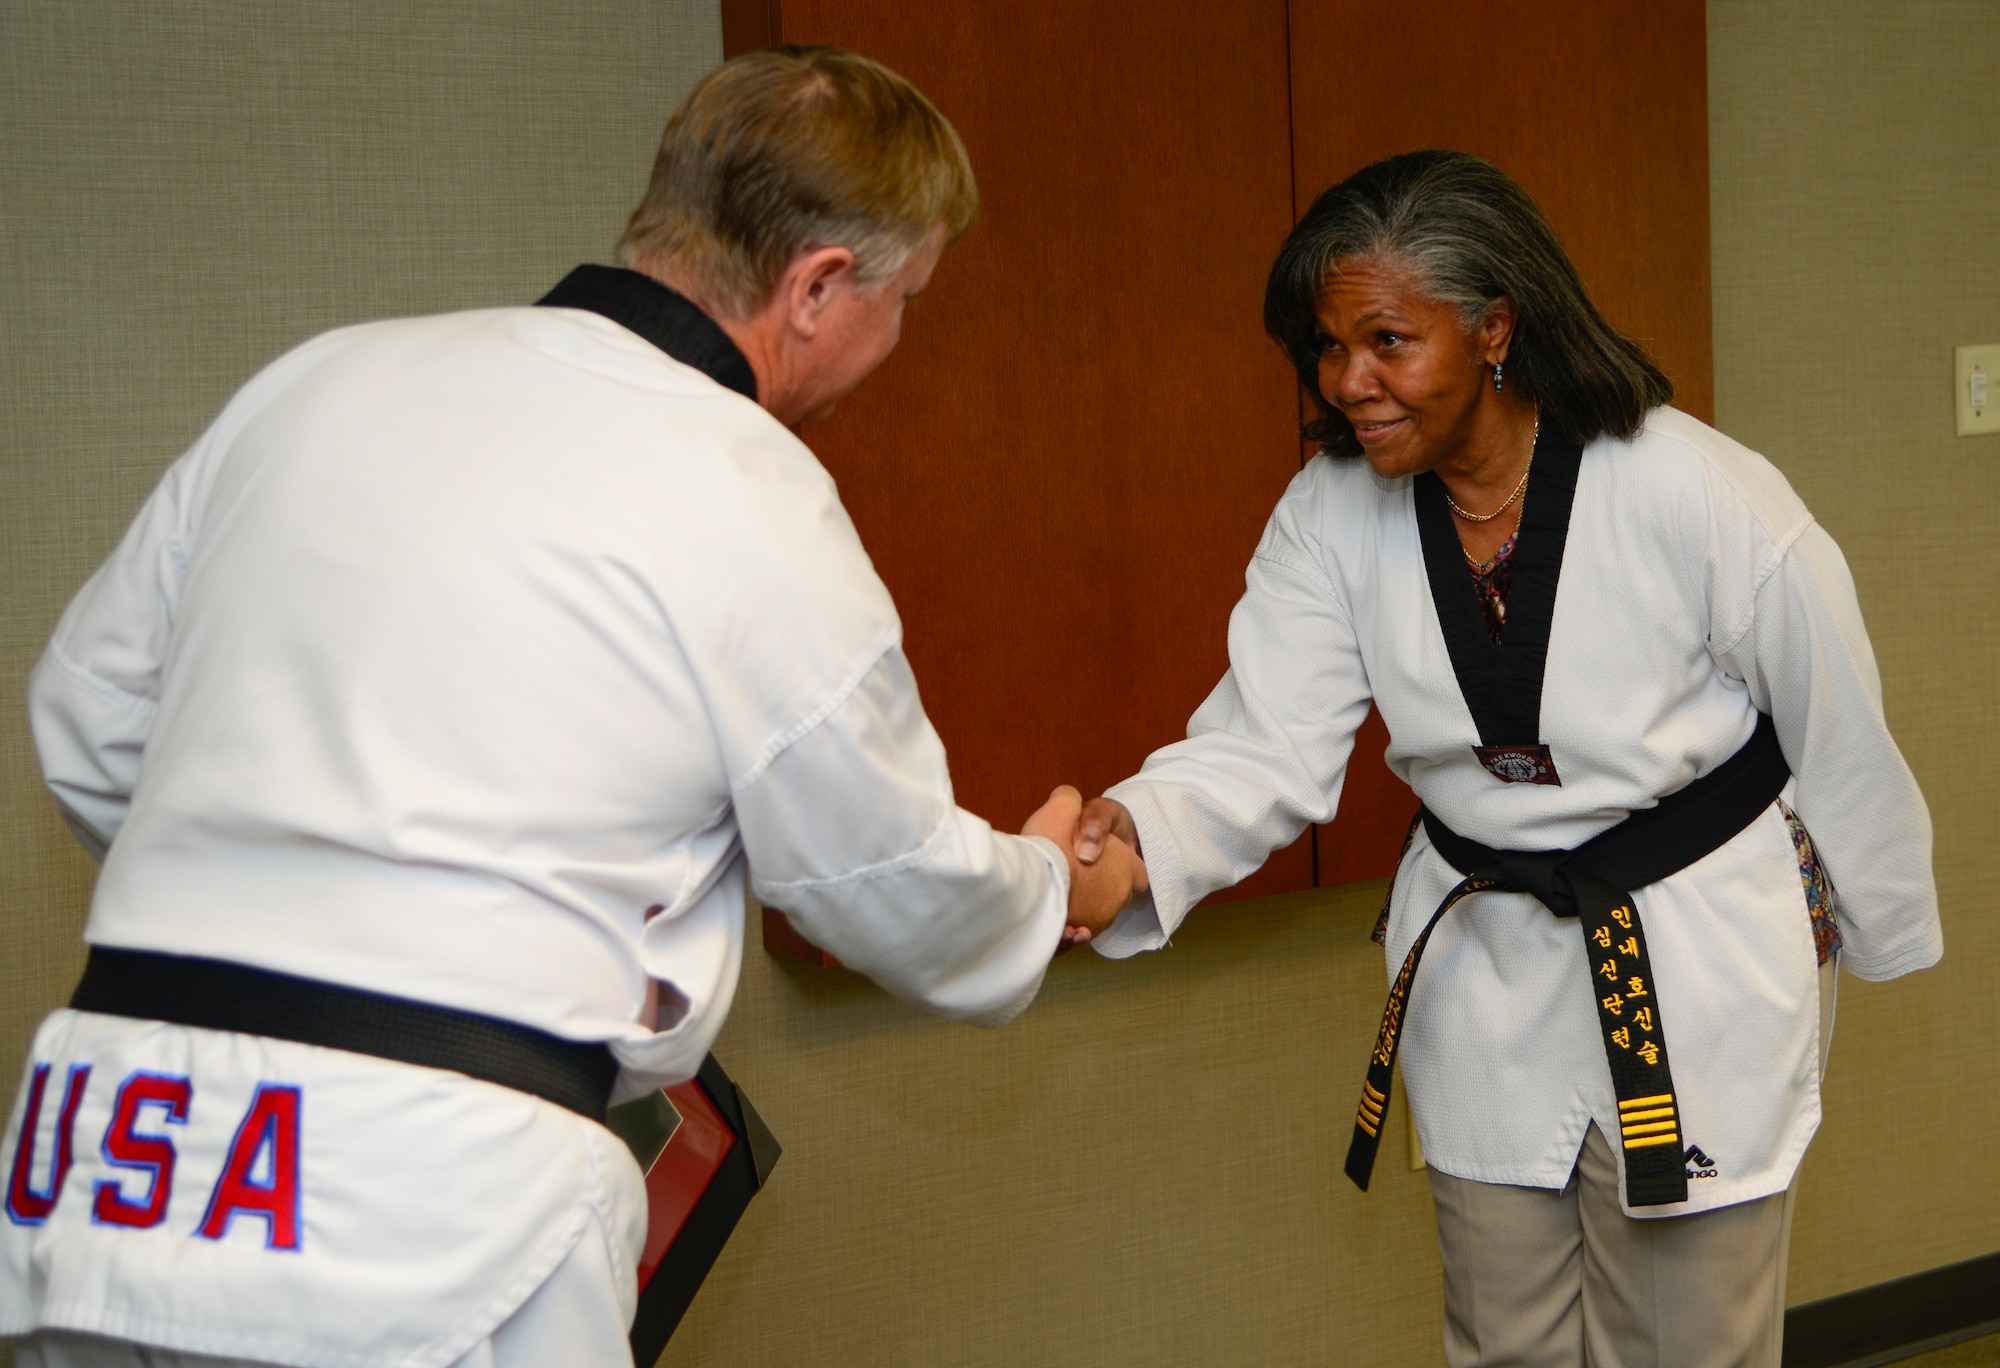 Rose Alexander, 628th Air Base Wing chief of external information, accepts her honorary black belt from Grand Master Ray Smith, 8th degree Taekwondo black belt, at Joint Base Charleston – Air Base, S.C. Oct. 22, 2012. Alexander’s son, Charles Alexander, is a nationally recognized Taekwondo black belt and her grandson, Alexander Cheatham, although legally blind, has excelled in Taekwondo . (U.S. Air Force Photo / Staff Sgt. Rasheen Douglas)